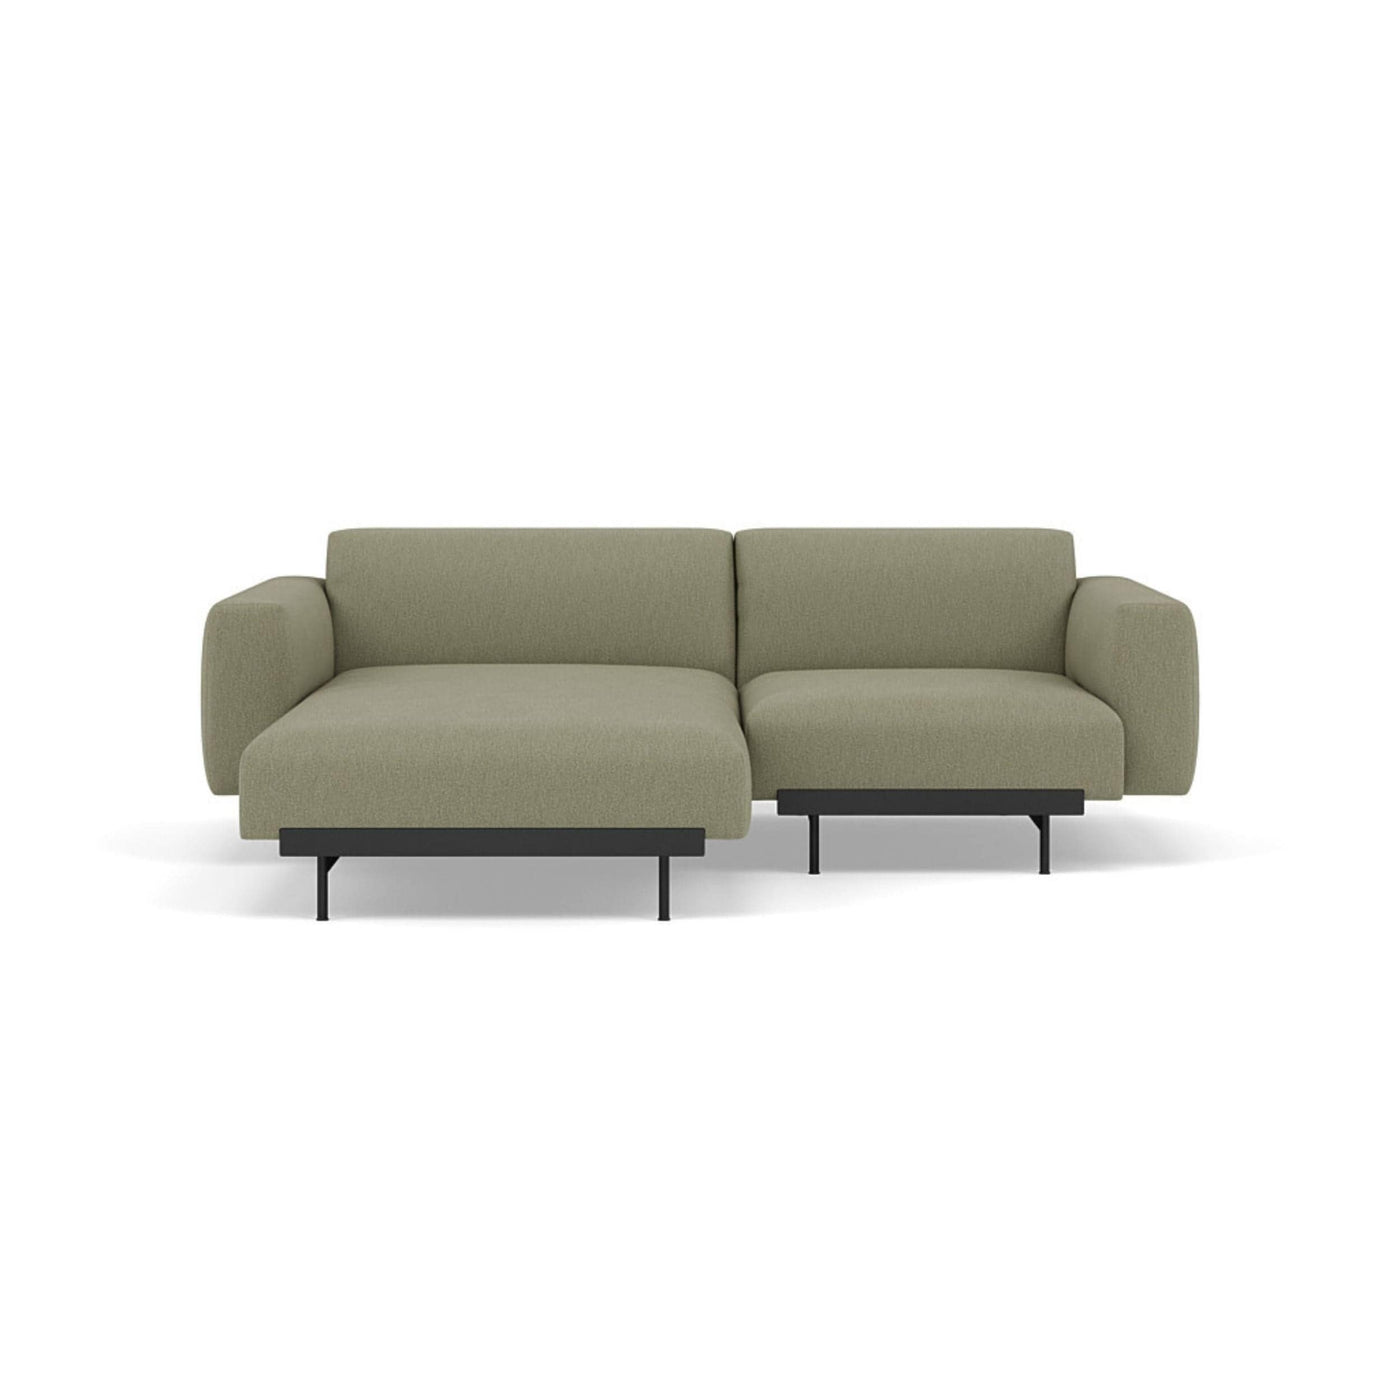 Muuto In Situ Modular 2 Seater Sofa, configuration 5 in clay 15 fabric. Made to order from someday designs #colour_clay-15